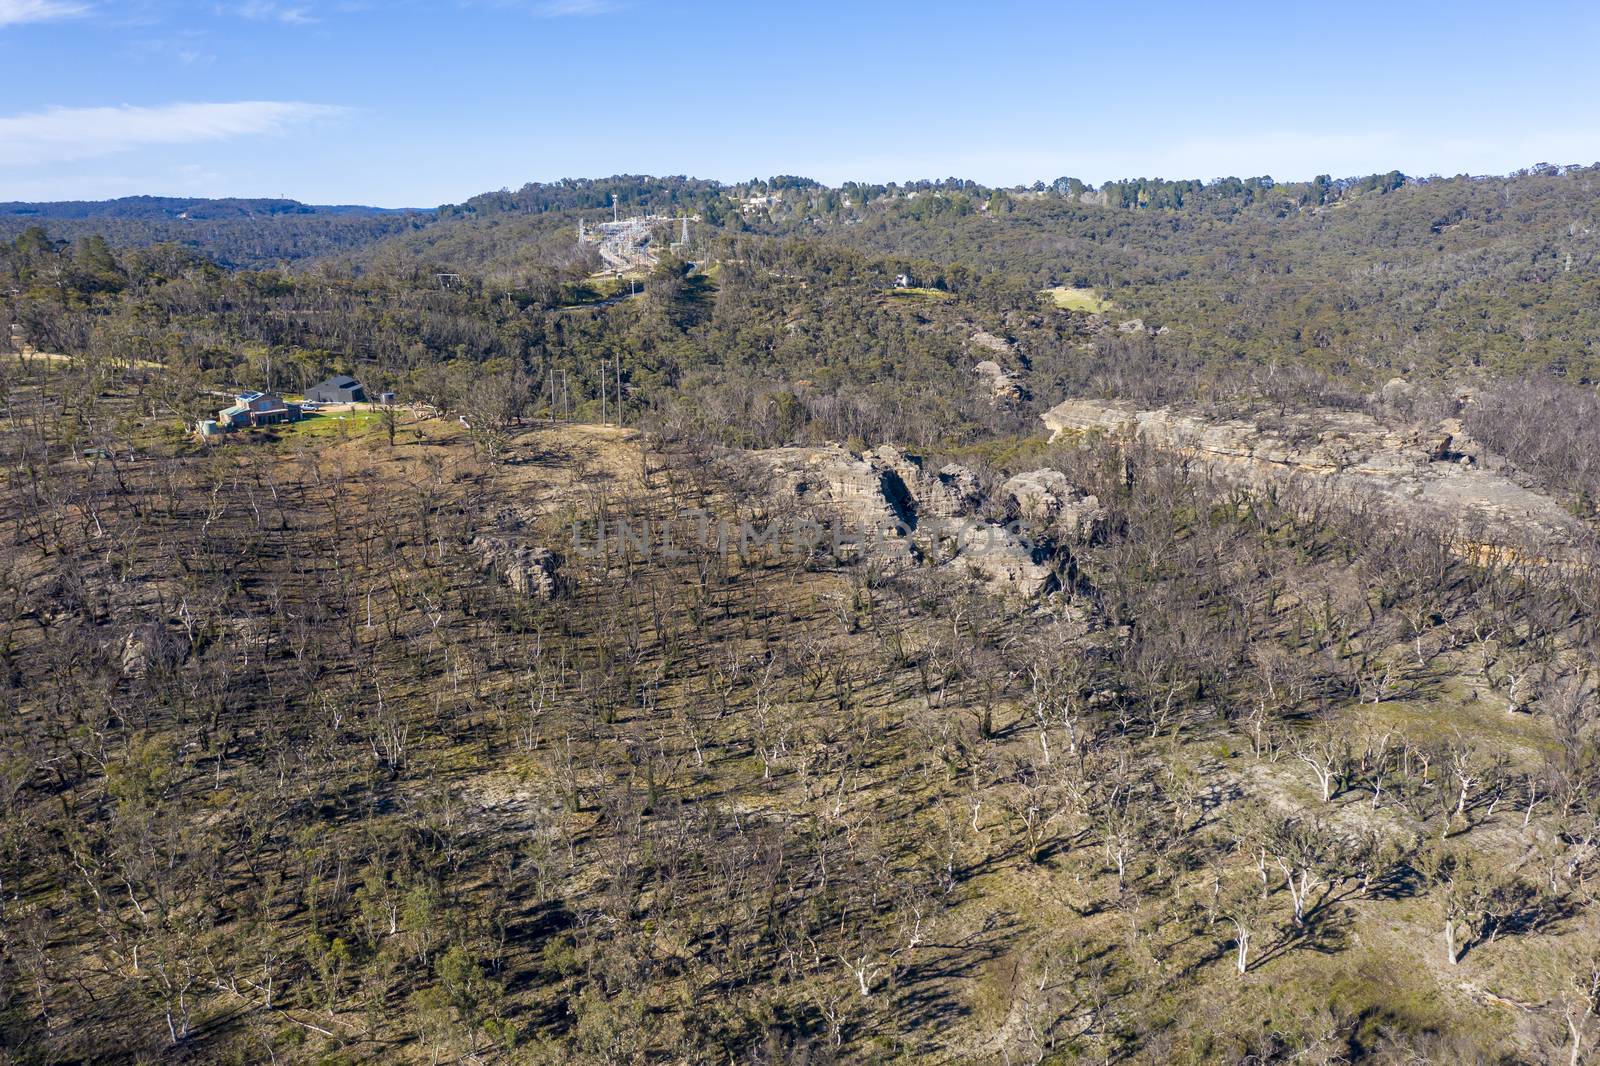 Forest regeneration after bushfire in The Blue Mountains by WittkePhotos